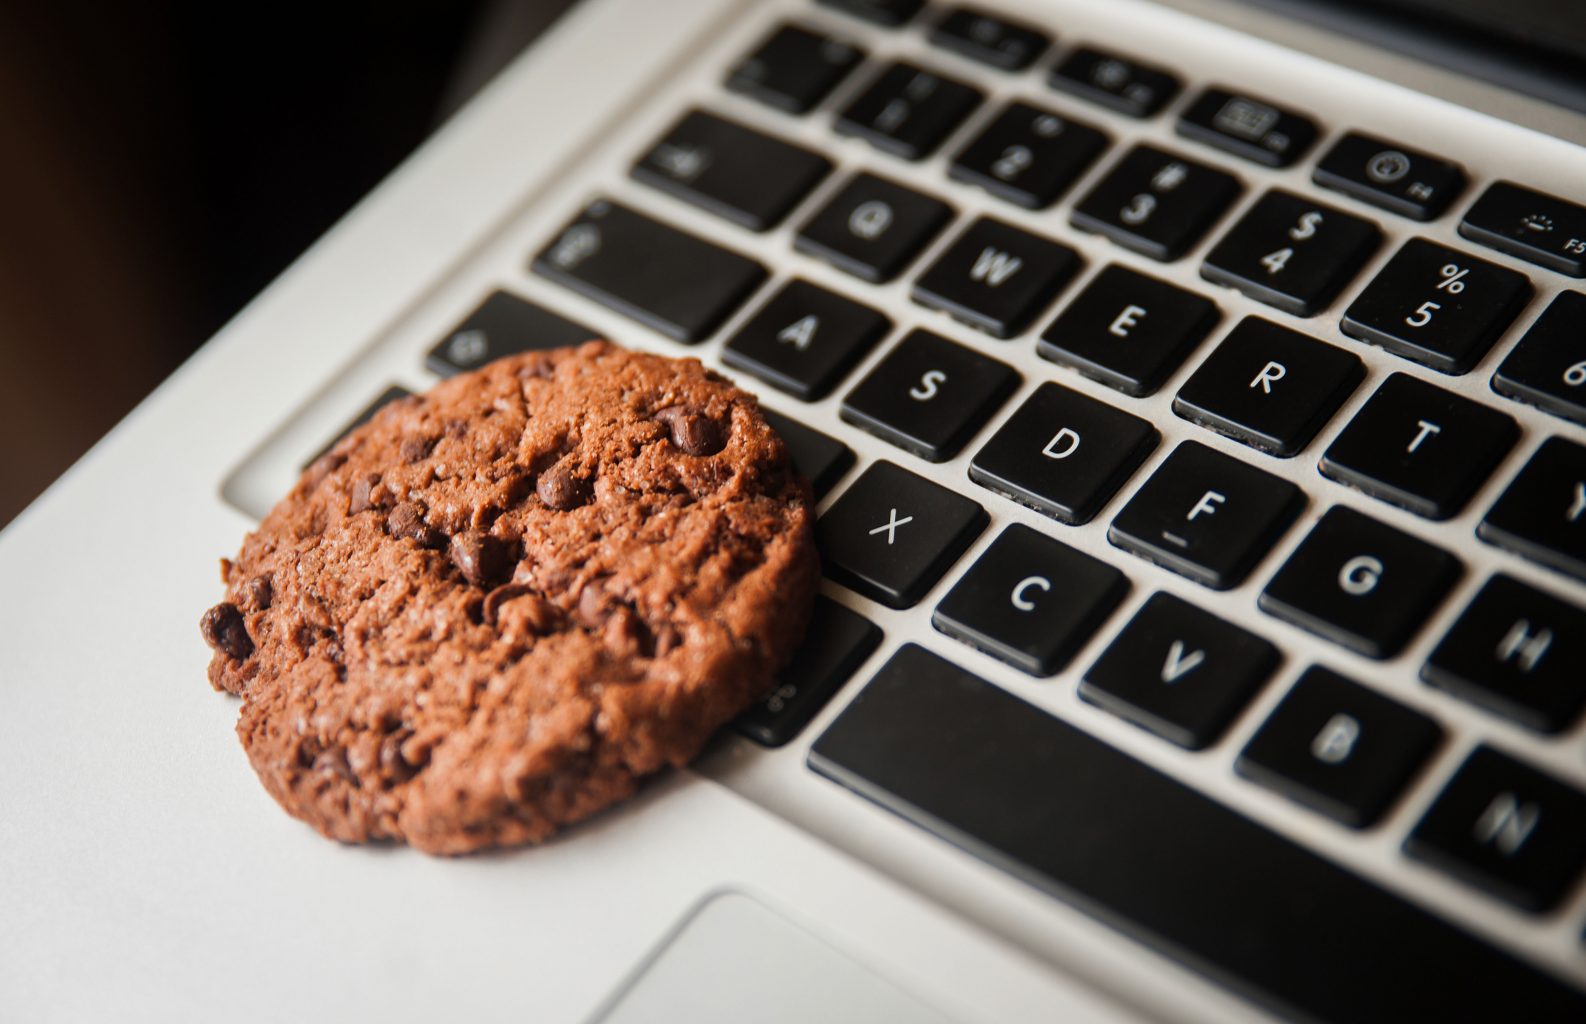 Business Insider - iQuanti - How Third-party Cookie Tracking Getting Blocked Could Impact Marketing